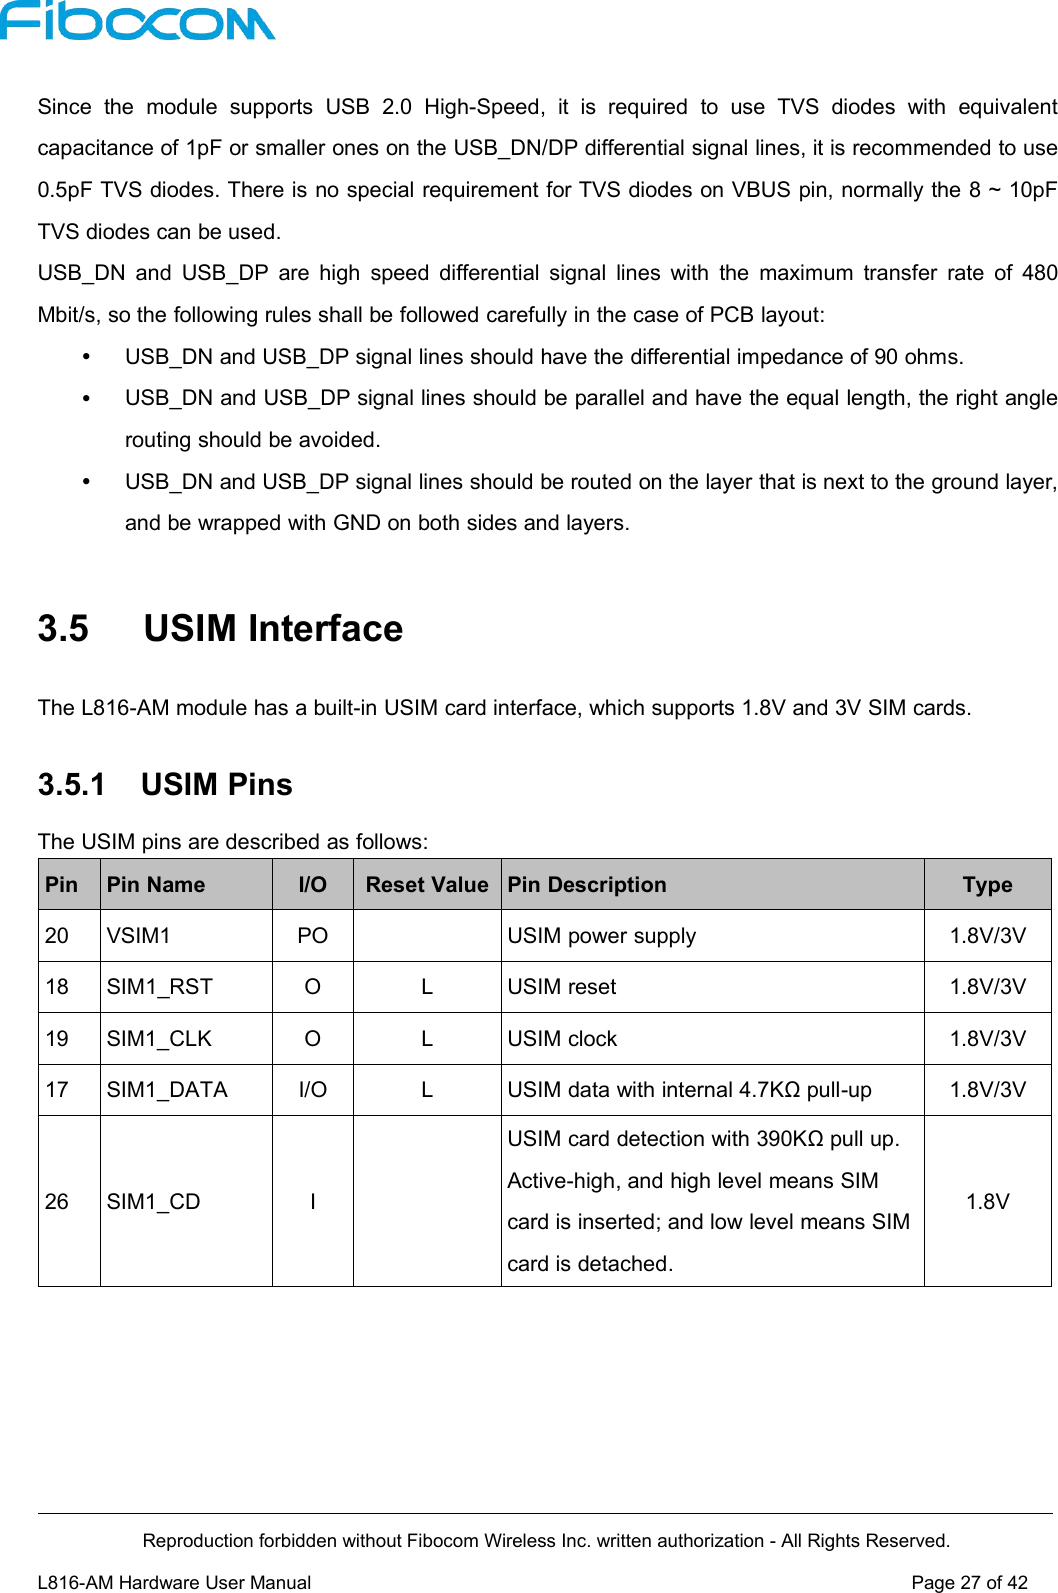 Reproduction forbidden without Fibocom Wireless Inc. written authorization - All Rights Reserved.L816-AM Hardware User Manual Page27of42Since the module supports USB 2.0 High-Speed, it is required to use TVS diodes with equivalentcapacitance of 1pF or smaller ones on the USB_DN/DP differential signal lines, it is recommended to use0.5pF TVS diodes. There is no special requirement for TVS diodes on VBUS pin, normally the 8 ~ 10pFTVS diodes can be used.USB_DN and USB_DP are high speed differential signal lines with the maximum transfer rate of 480Mbit/s, so the following rules shall be followed carefully in the case of PCB layout:USB_DN and USB_DP signal lines should have the differential impedance of 90 ohms.USB_DN and USB_DP signal lines should be parallel and have the equal length, the right anglerouting should be avoided.USB_DN and USB_DP signal lines should be routed on the layer that is next to the ground layer,and be wrapped with GND on both sides and layers.3.5 USIM InterfaceThe L816-AM module has a built-in USIM card interface, which supports 1.8V and 3V SIM cards.3.5.1 USIM PinsThe USIM pins are described as follows:PinPin NameI/OReset ValuePin DescriptionType20VSIM1POUSIM power supply1.8V/3V18SIM1_RSTOLUSIM reset1.8V/3V19SIM1_CLKOLUSIM clock1.8V/3V17SIM1_DATAI/OLUSIM data with internal 4.7KΩ pull-up1.8V/3V26SIM1_CDIUSIM card detection with 390KΩ pull up.Active-high, and high level means SIMcard is inserted; and low level means SIMcard is detached.1.8V